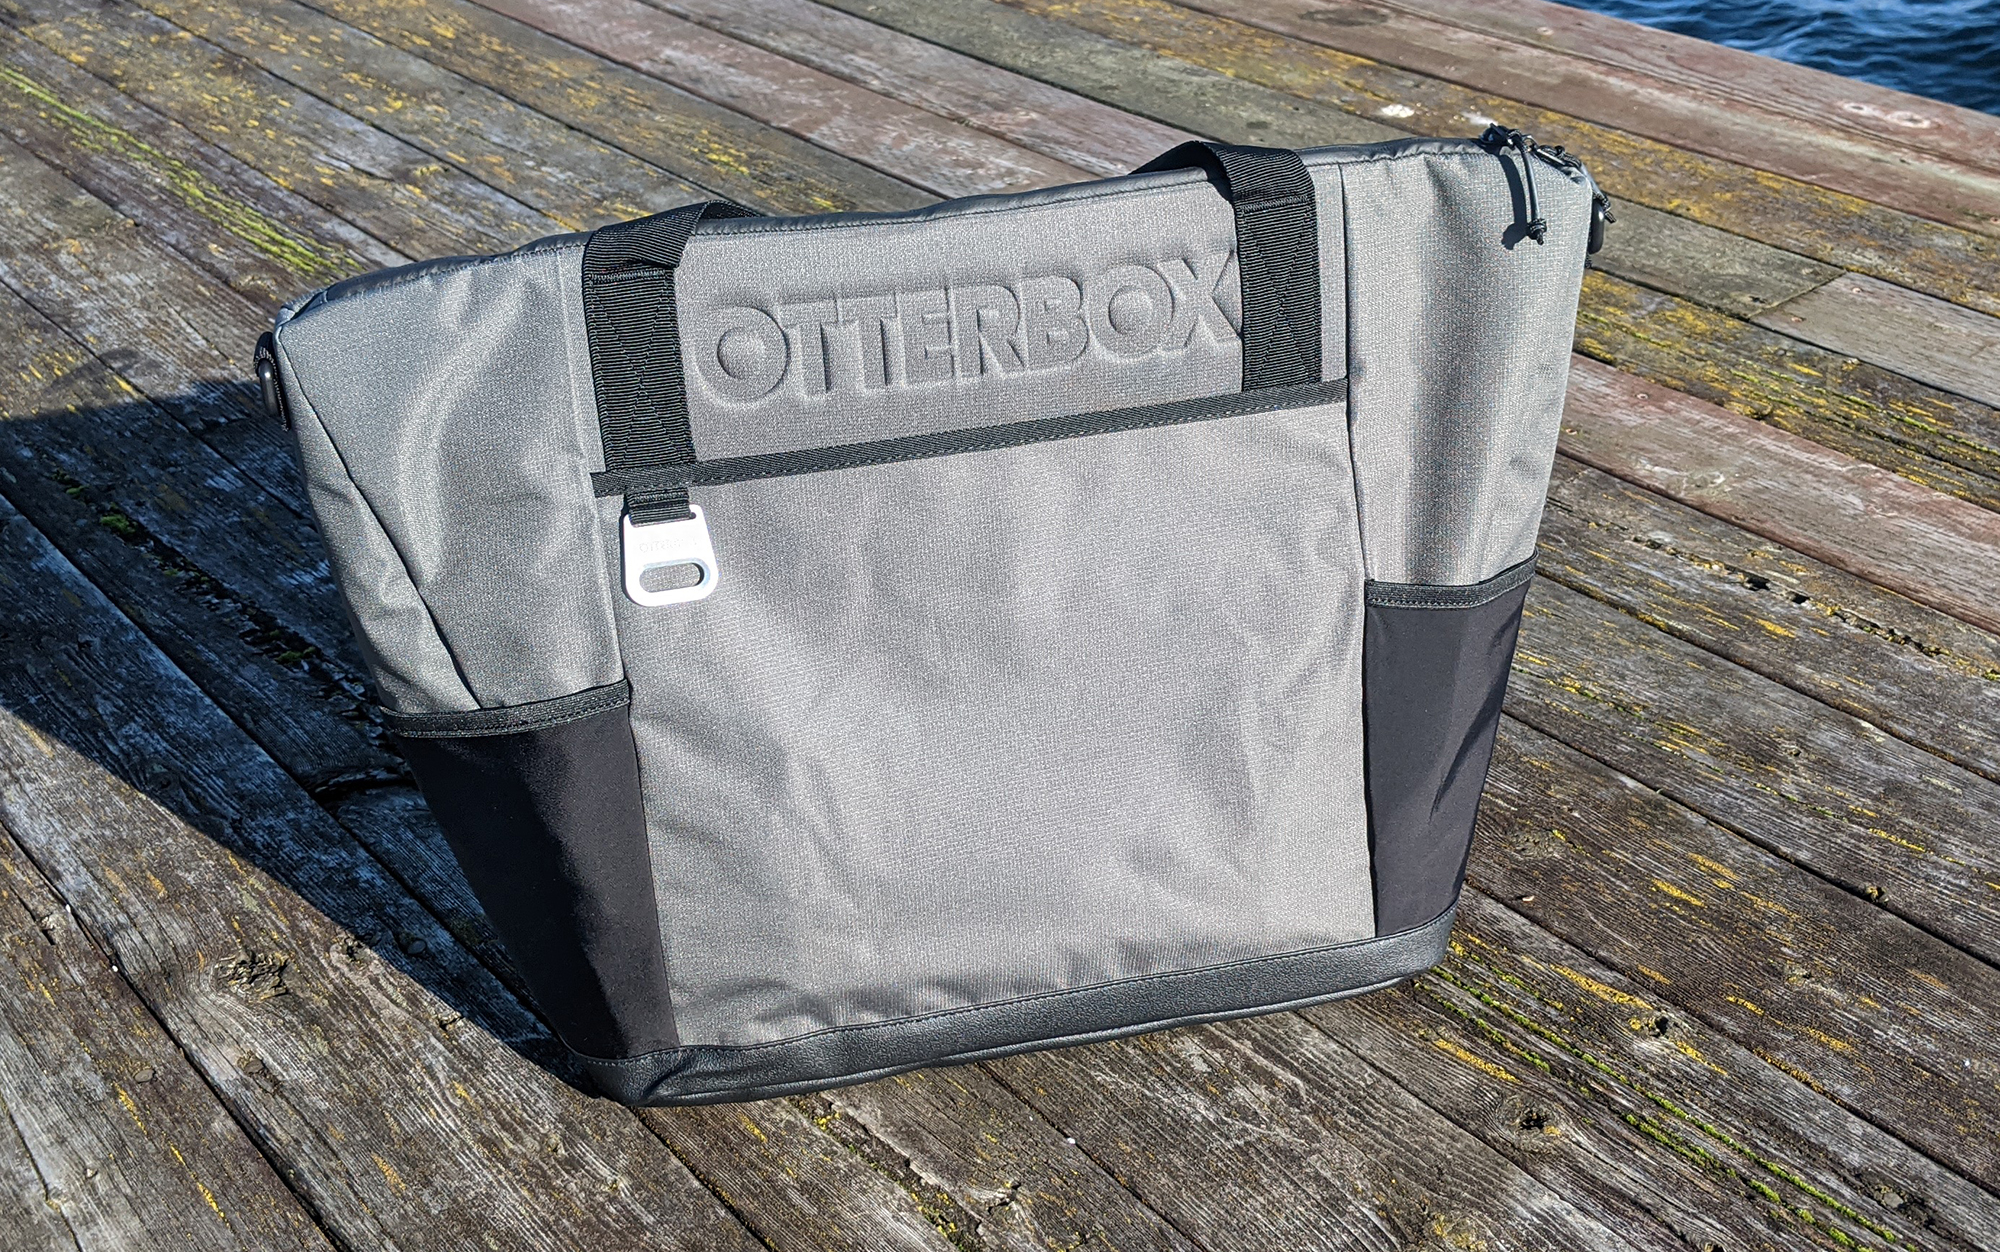 Otterbox Tote Cooler